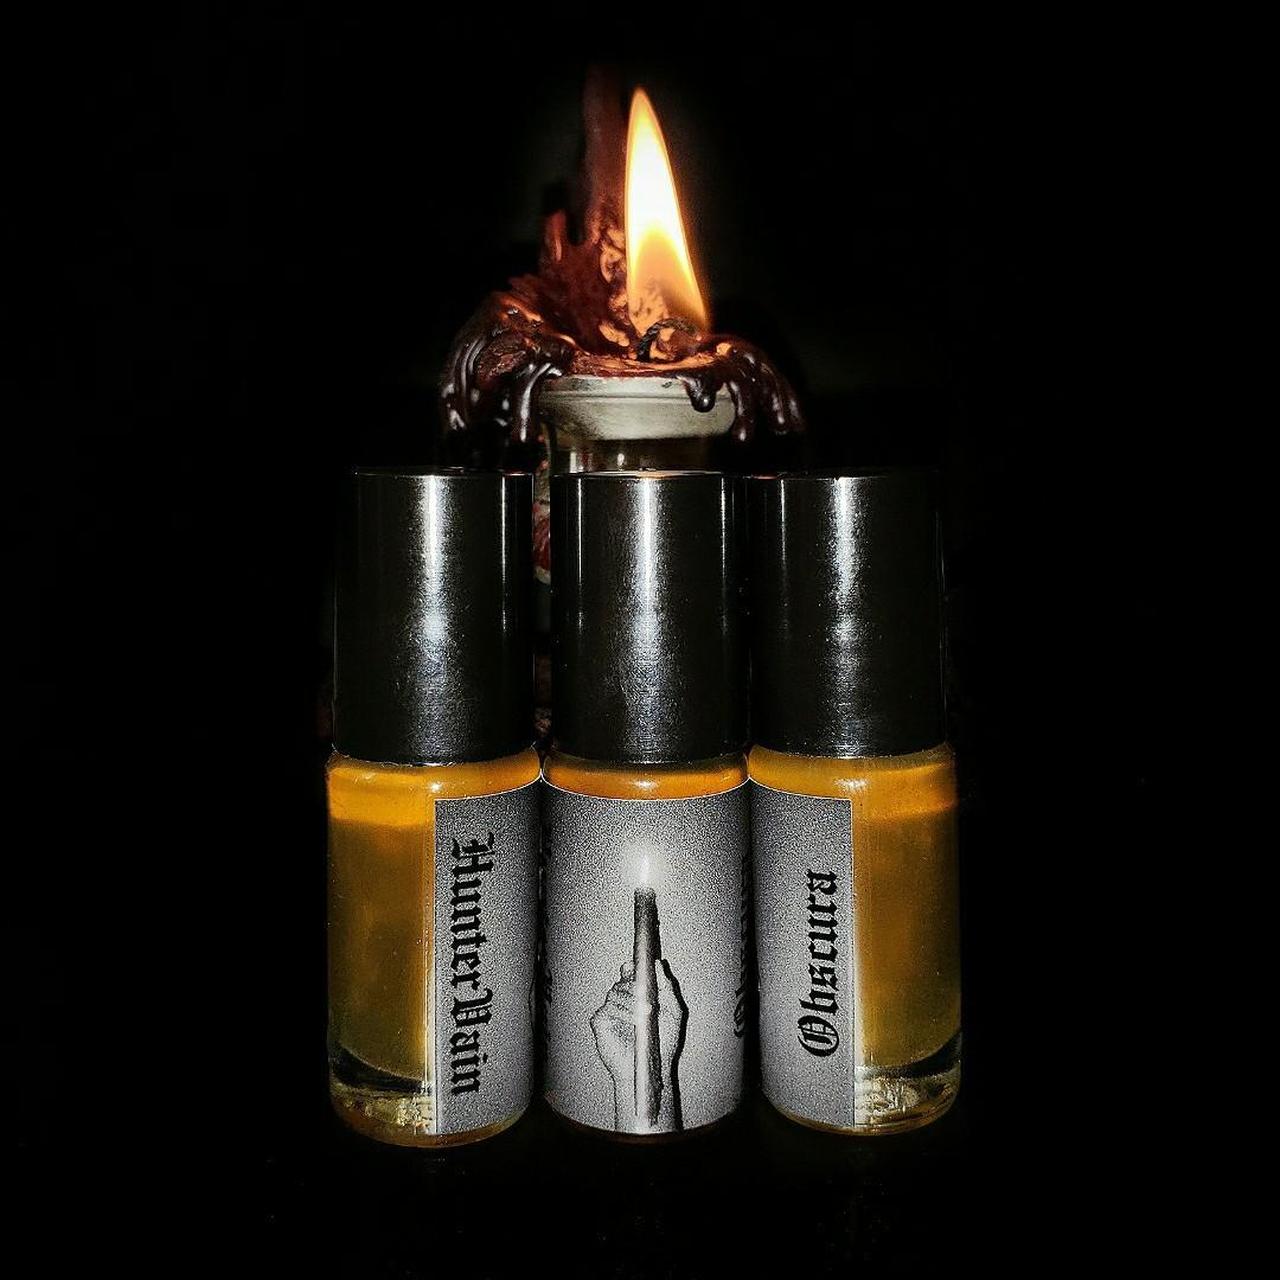 Product Image 1 - 🌒🕯𝕺𝖇𝖘𝖈𝖚𝖗𝖆 𝔭𝔢𝔯𝔣𝔲𝔪𝔢 𝔬𝔦𝔩🍂🪵
𝔗𝔥𝔦𝔰 𝔦𝔰 𝔣𝔬𝔯